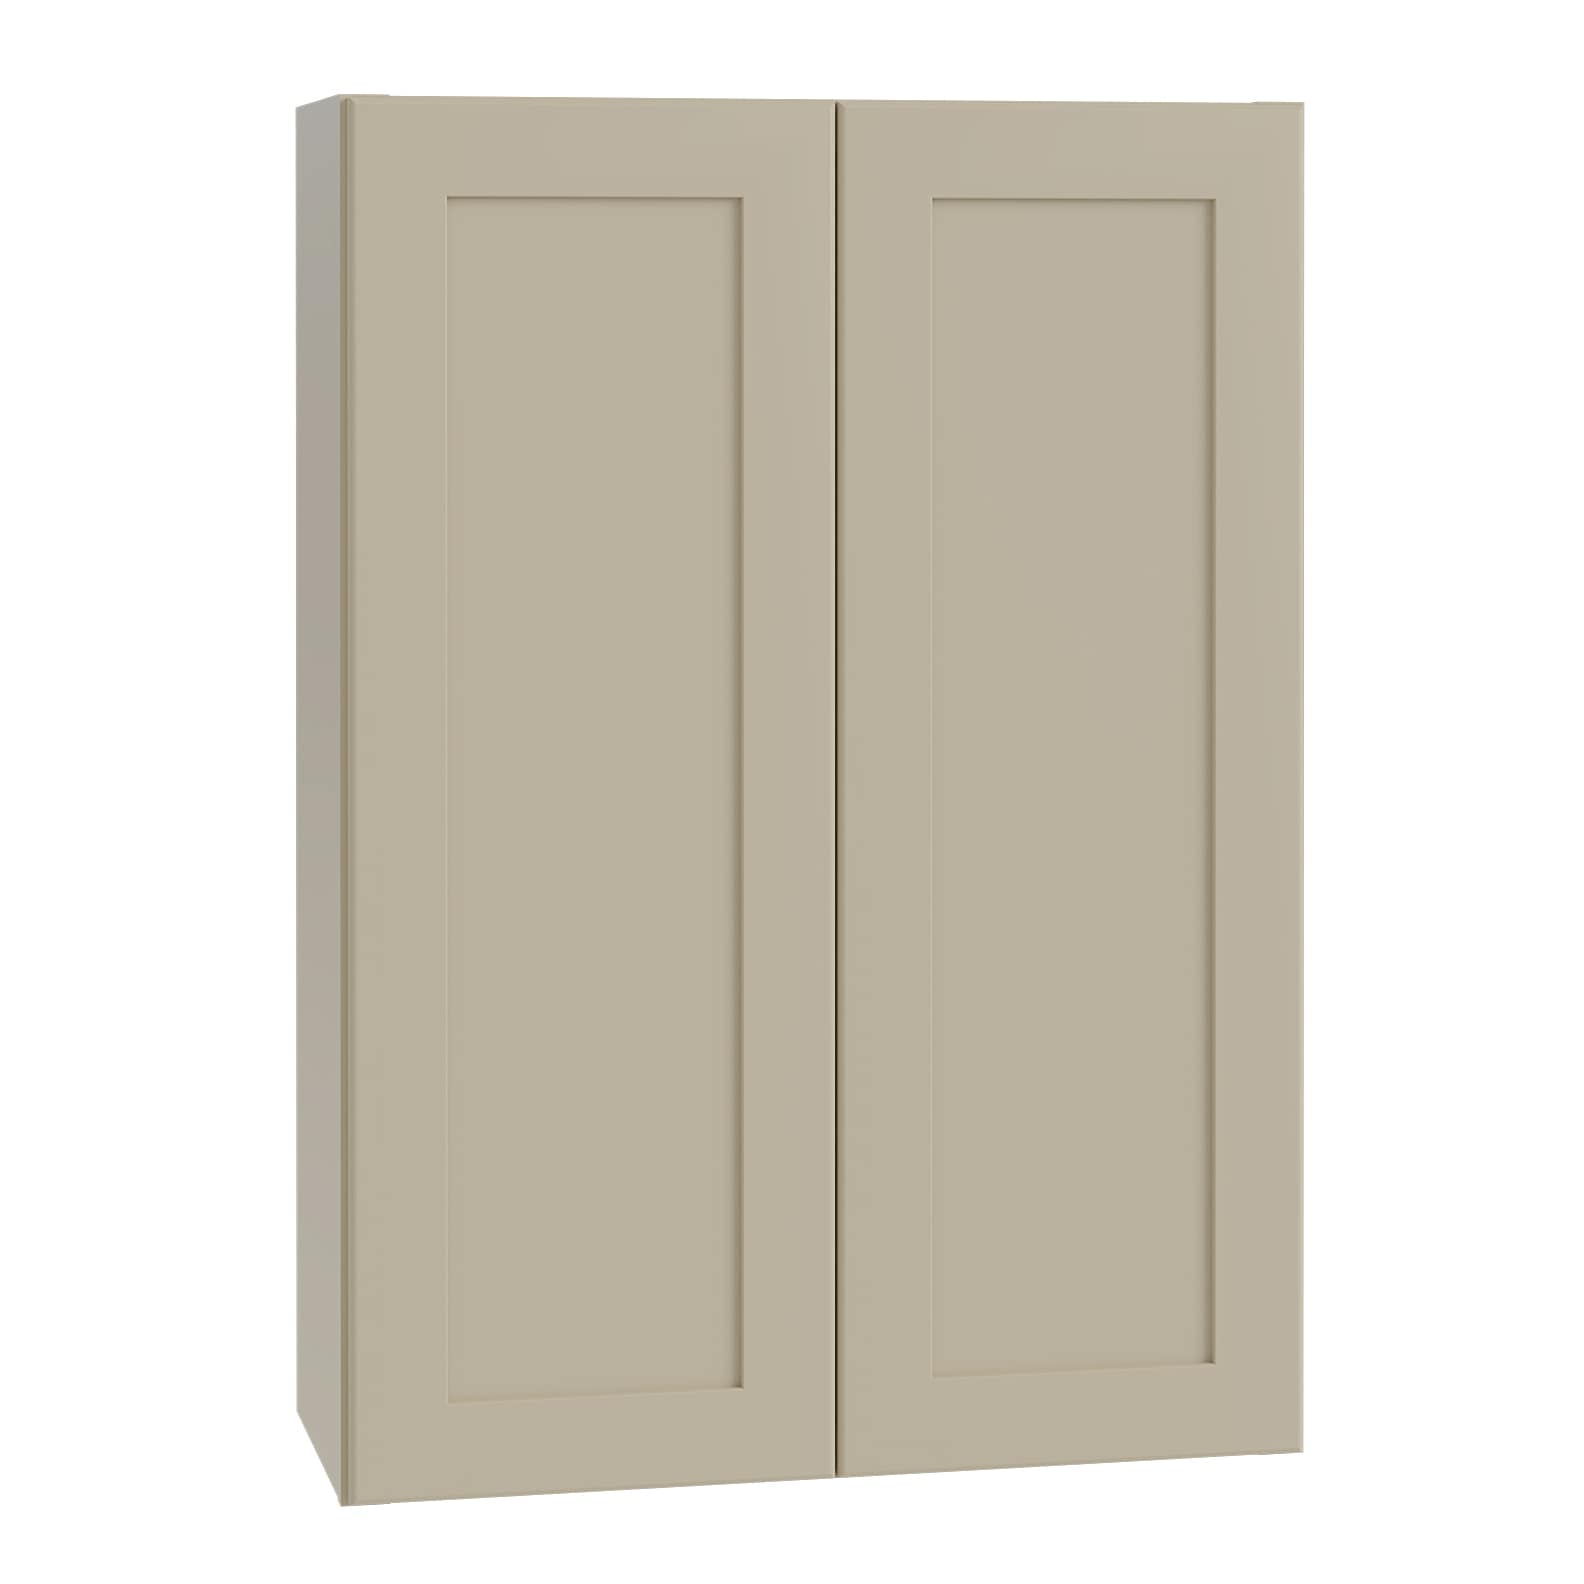 Luxxe Cabinetry 30-in W x 36-in H x 12-in D Norfolk Blended Cream Painted Door Wall Fully Assembled Semi-custom Cabinet in Off-White | W3036-NBC